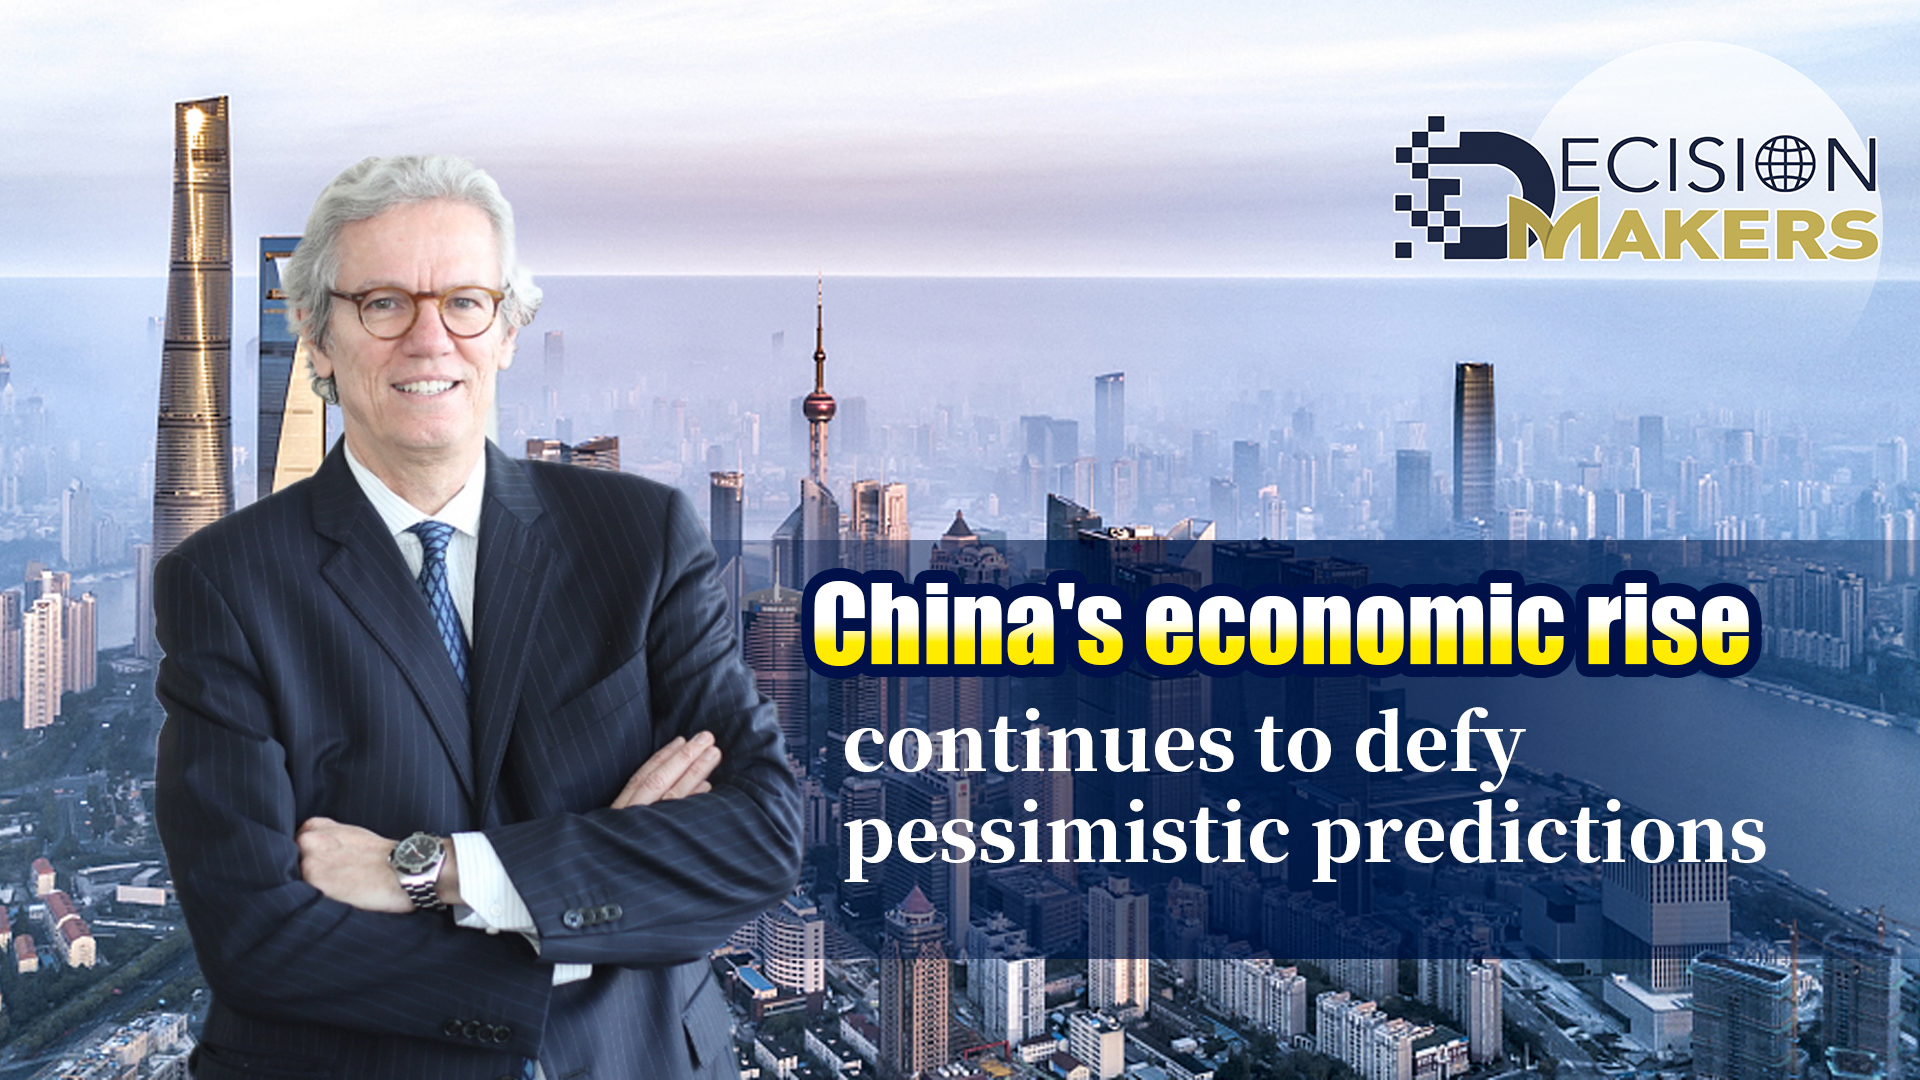 China's economic rise continues to defy pessimistic predictions